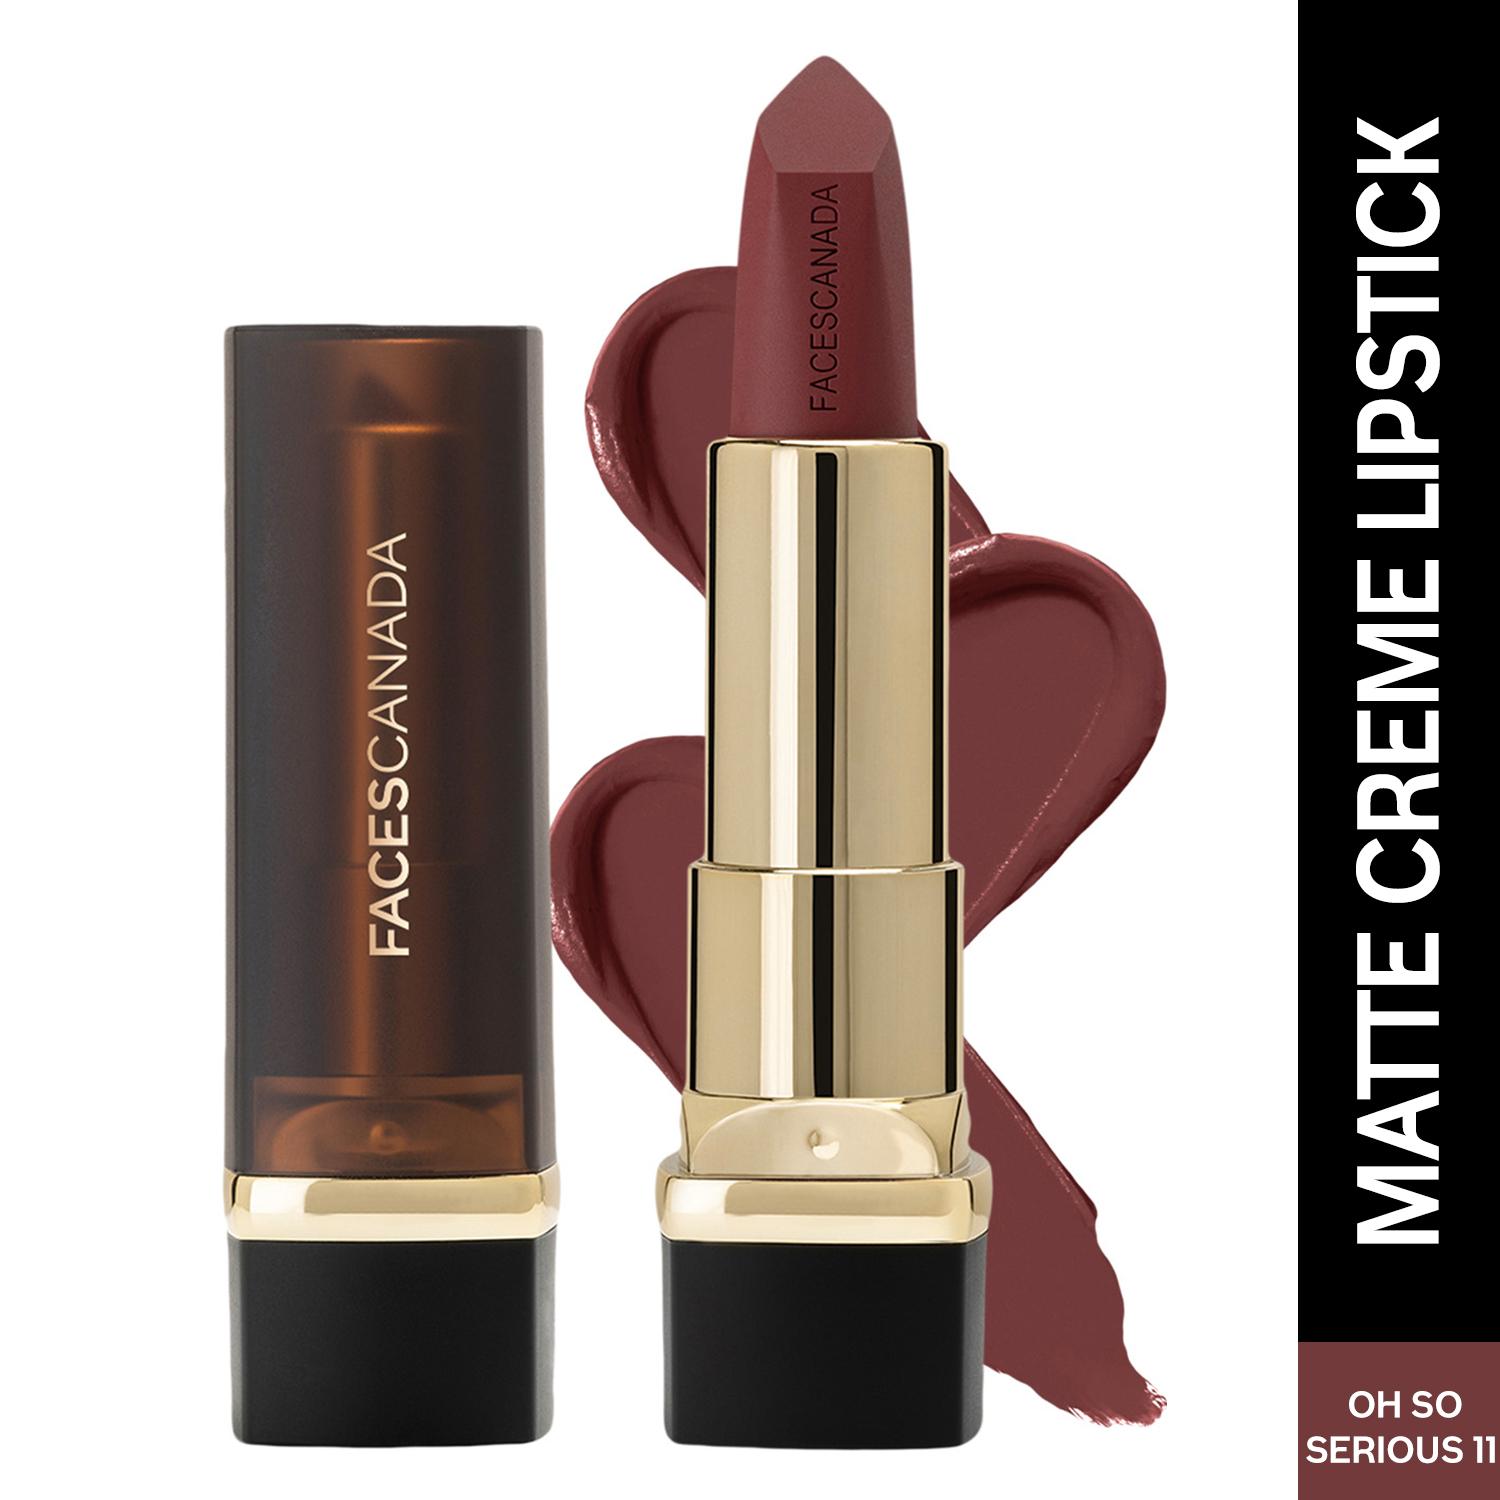 Faces Canada | Faces Canada Comfy Matte Crème Lipstick, 8HR Long Stay, Intense Color - Oh So Serious 11 (4.2 g)